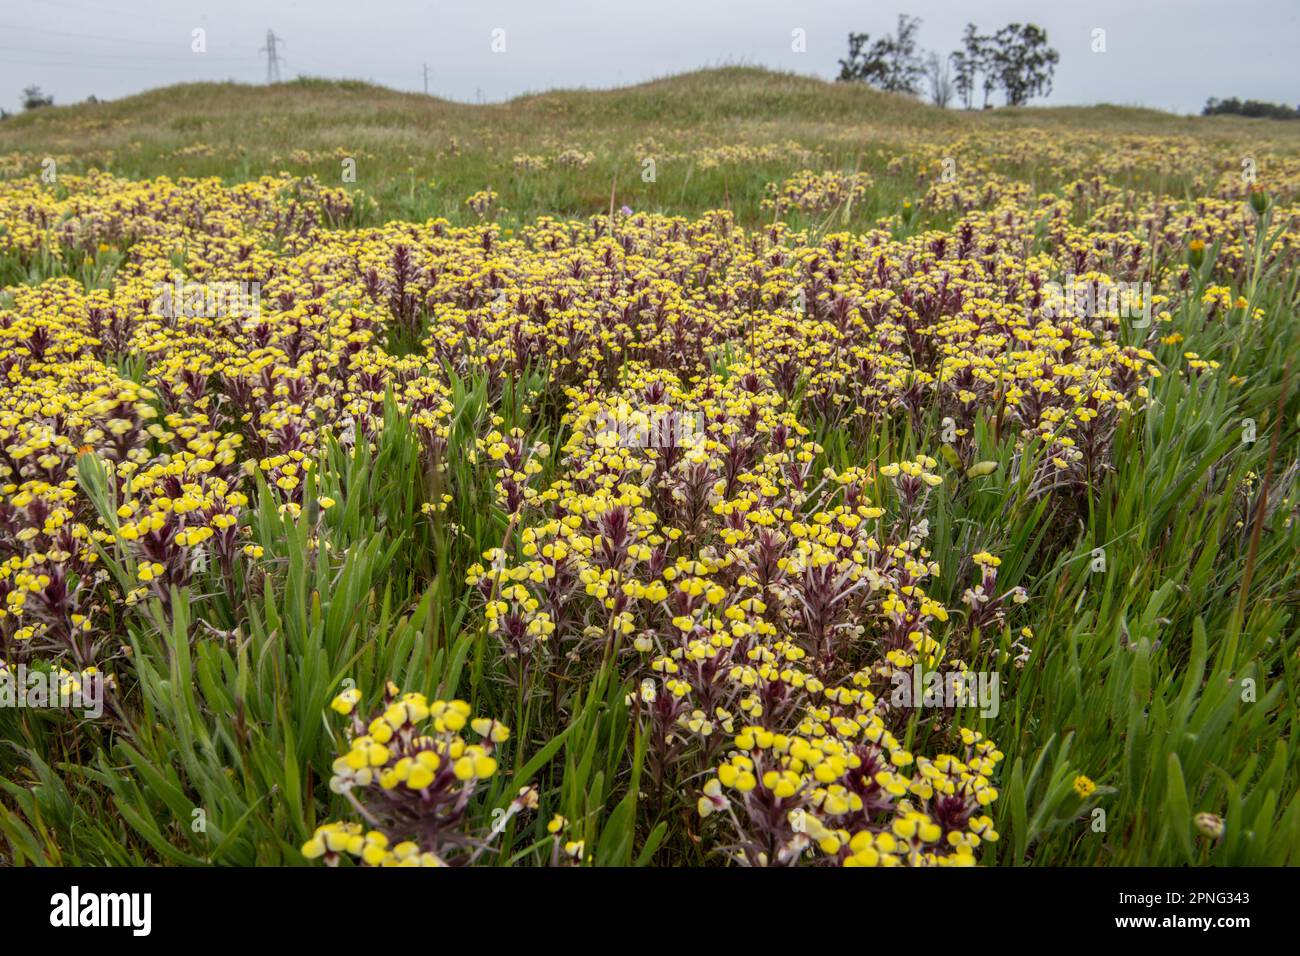 Vernal pool specialist wildflowers blooming in the Central Valley of California. Yellow johnny tuck or butter and eggs plant, Triphysaria eriantha. Stock Photo